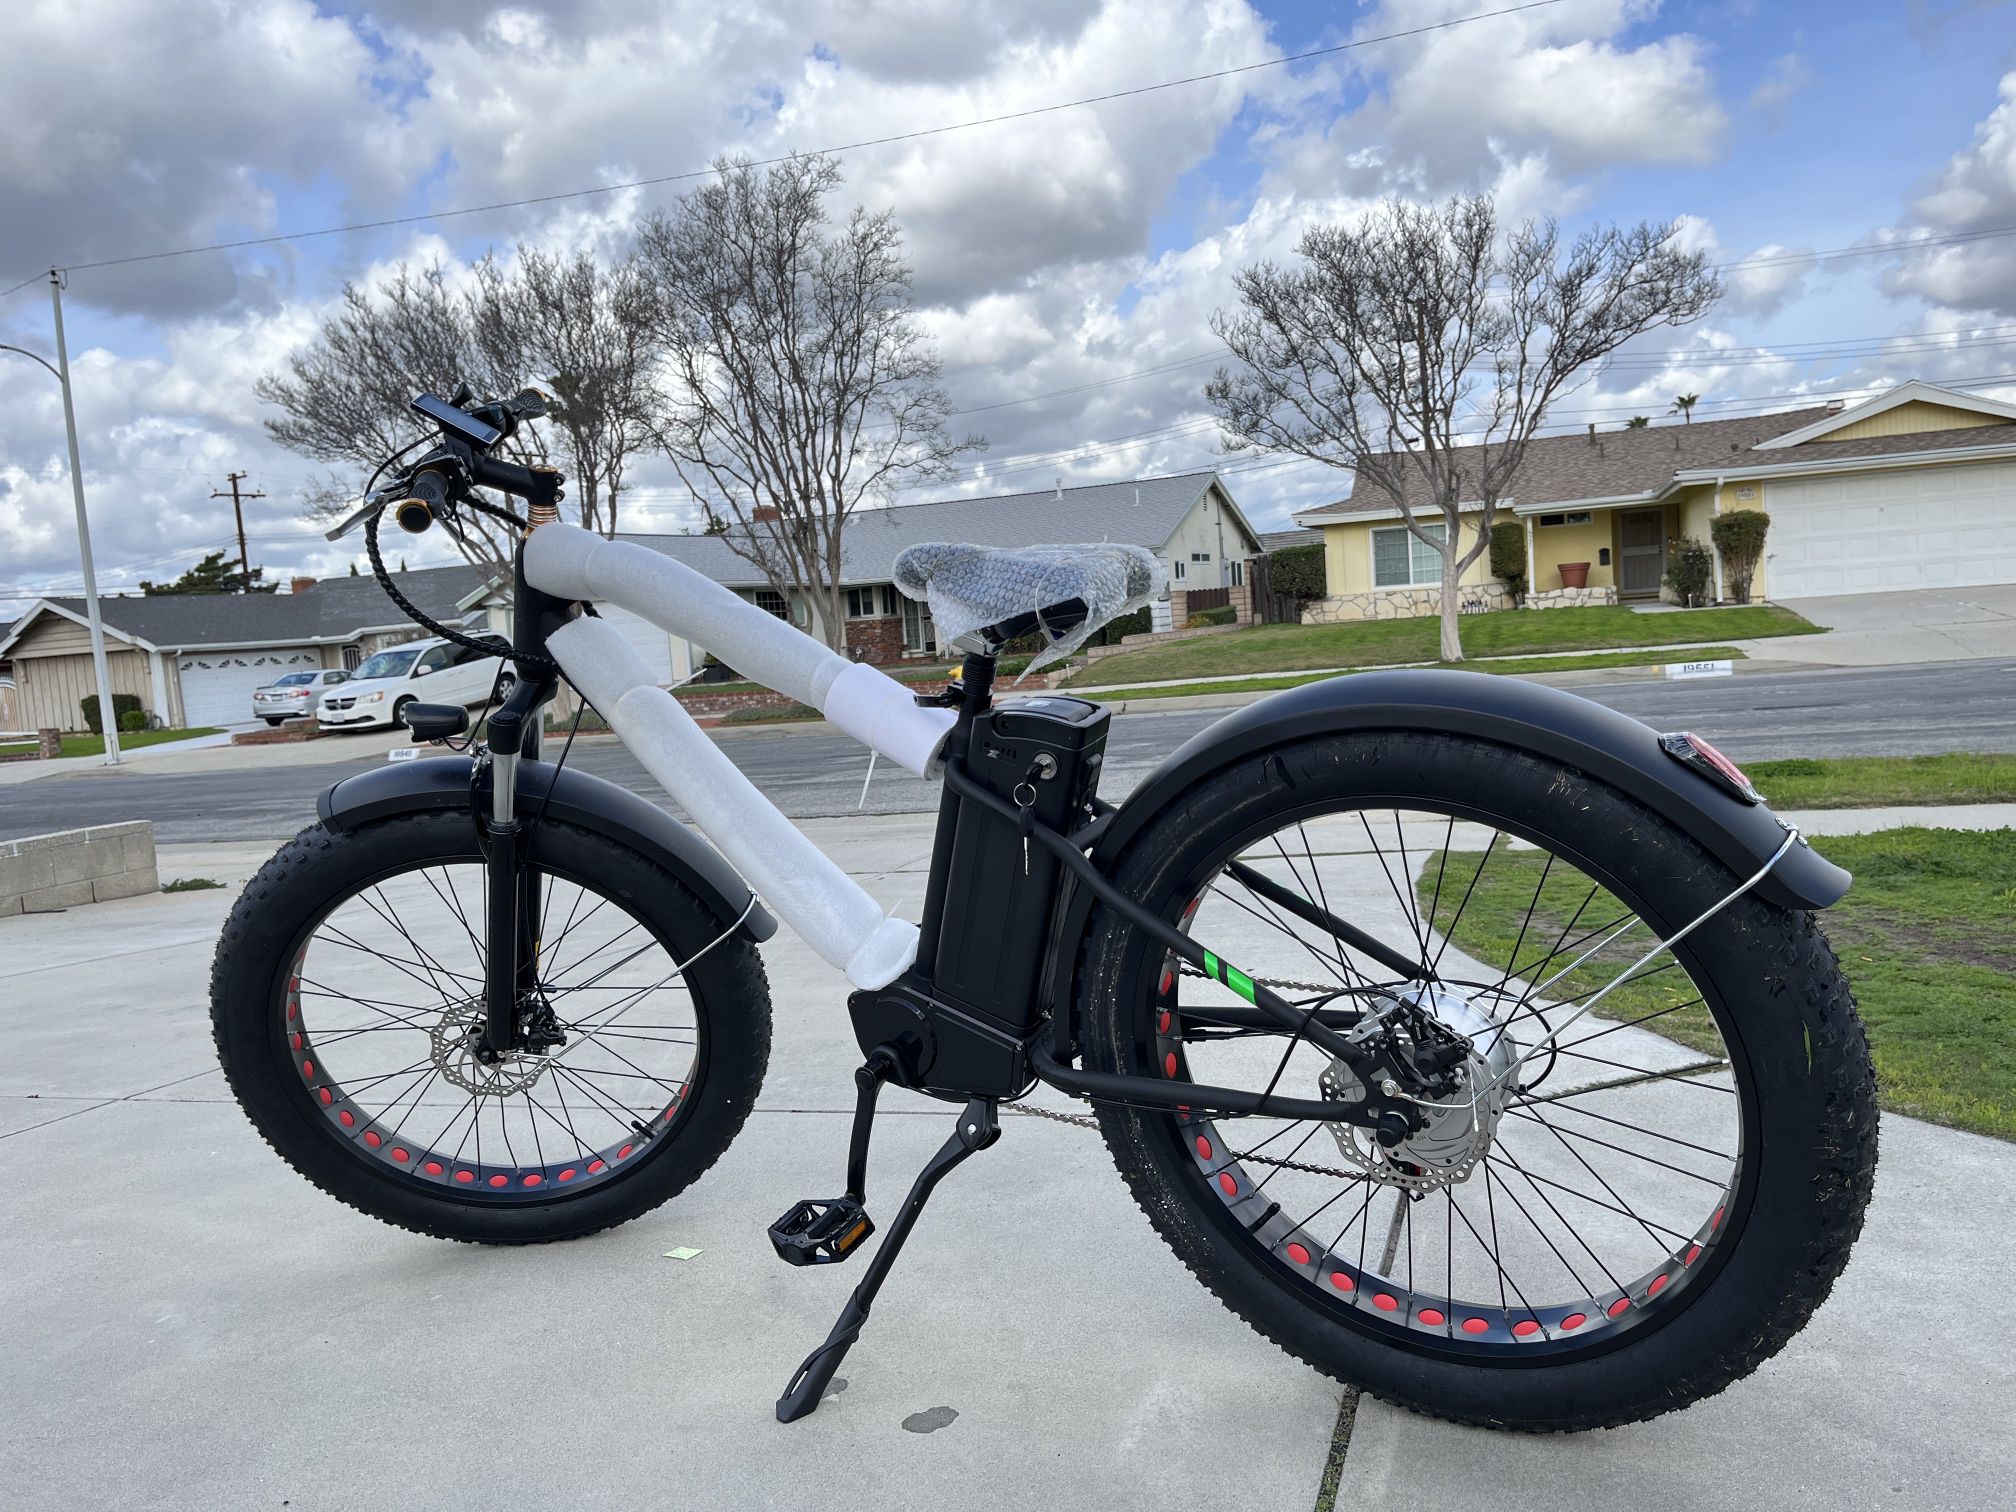 Electric bicycle, 800$, add a battery and a large seat cushion for 1000$